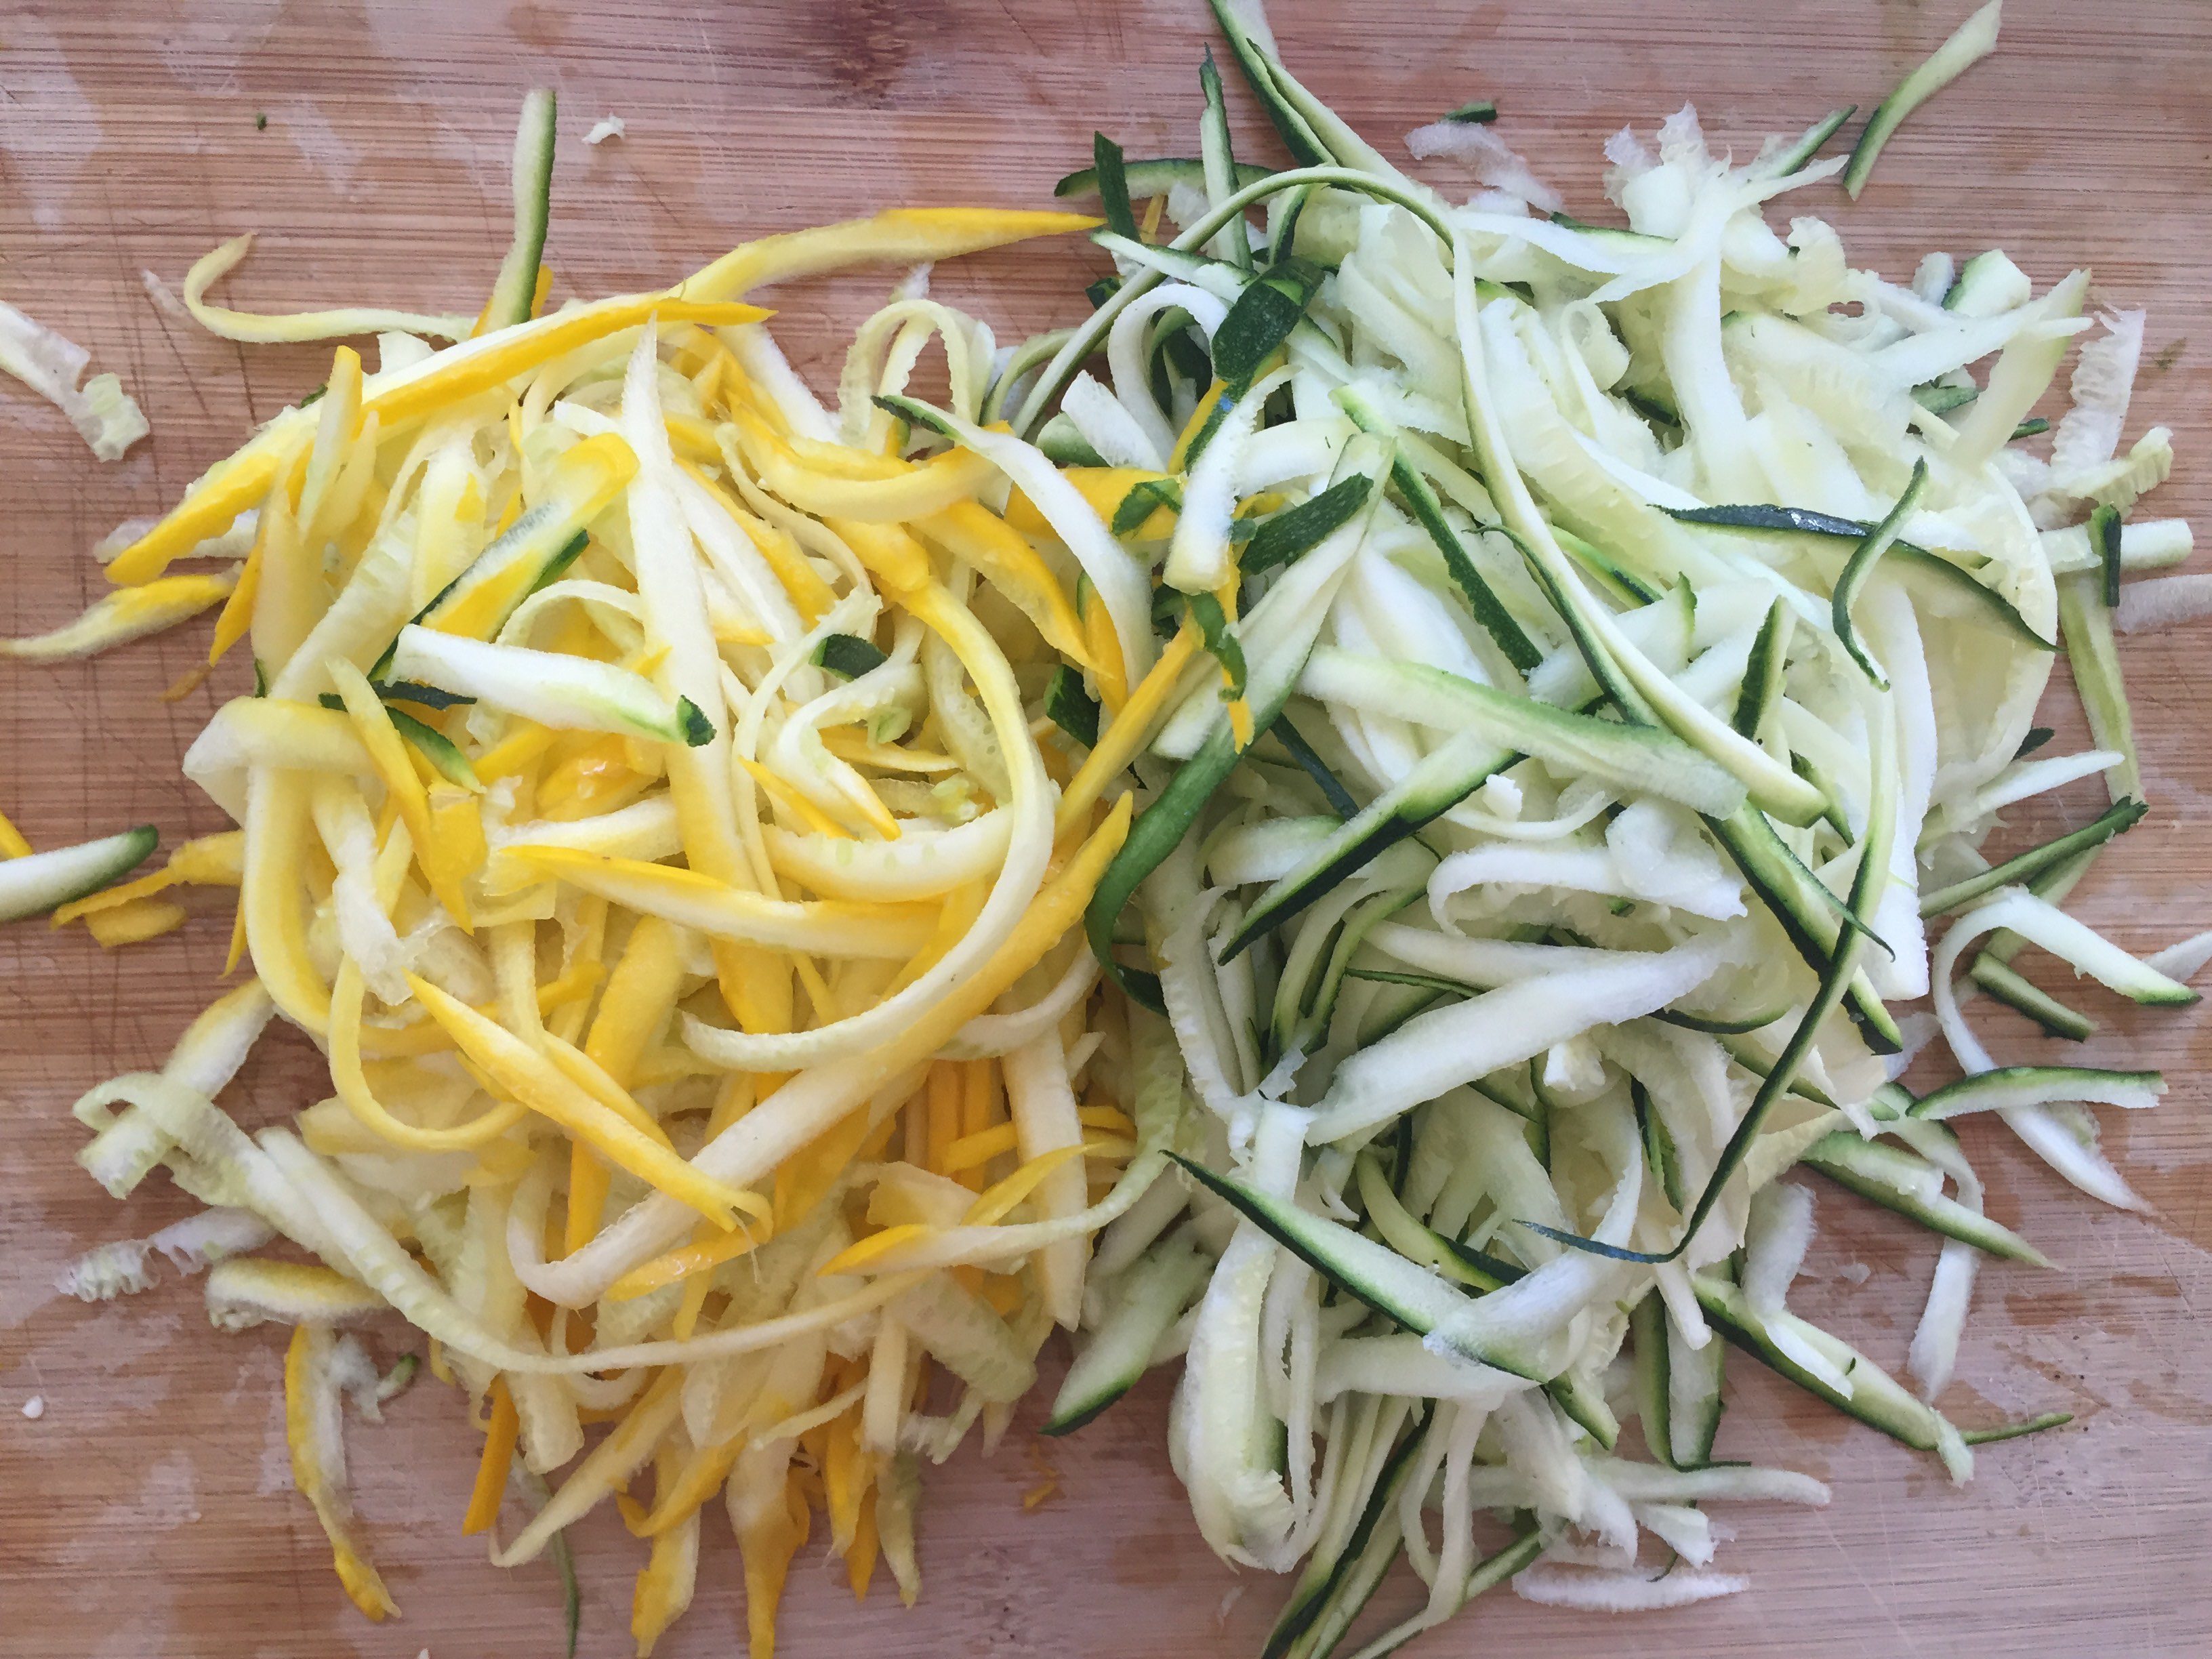 How to Make Zucchini Noodles Without a Spiralizer